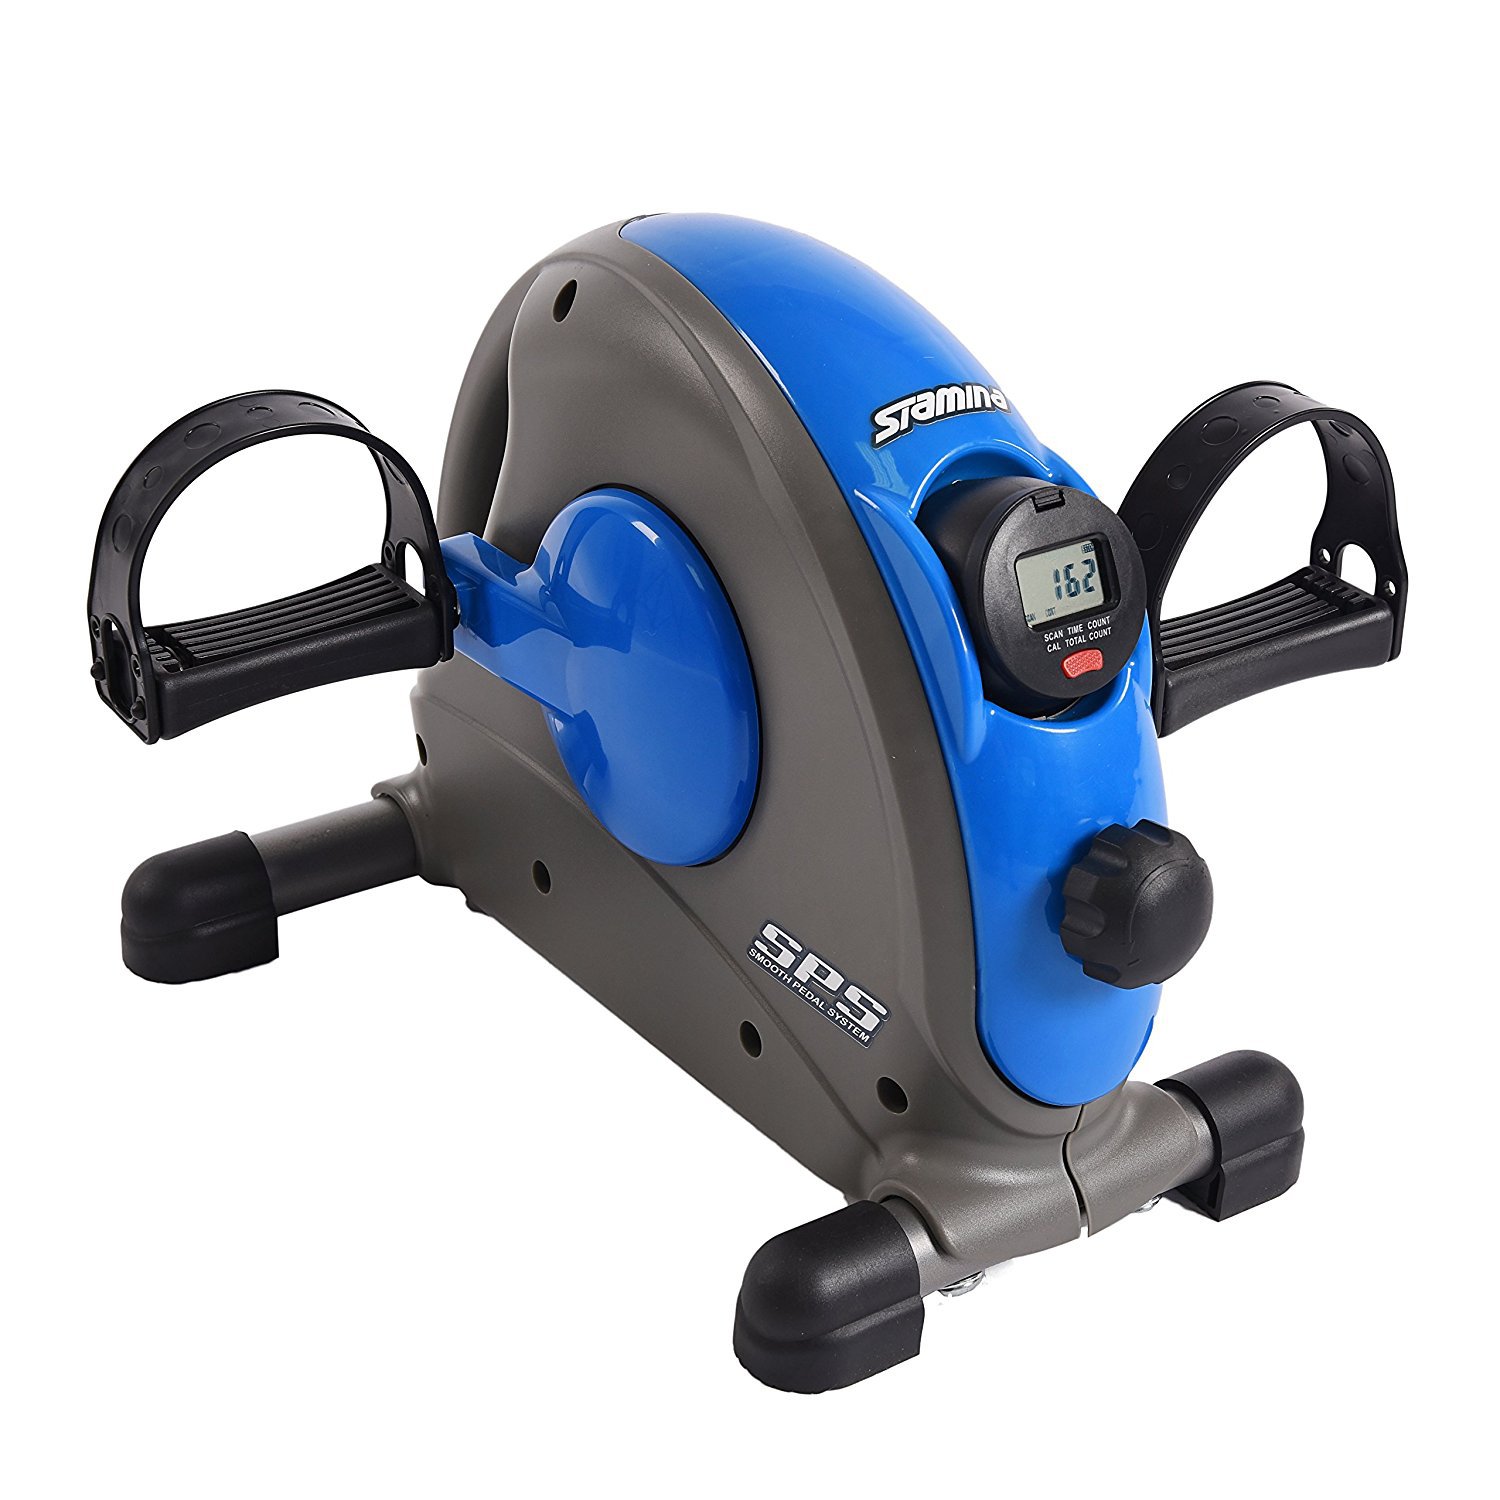 Stamina Mini Trainer Bike with Smooth Pedal System, Blue - image 1 of 9